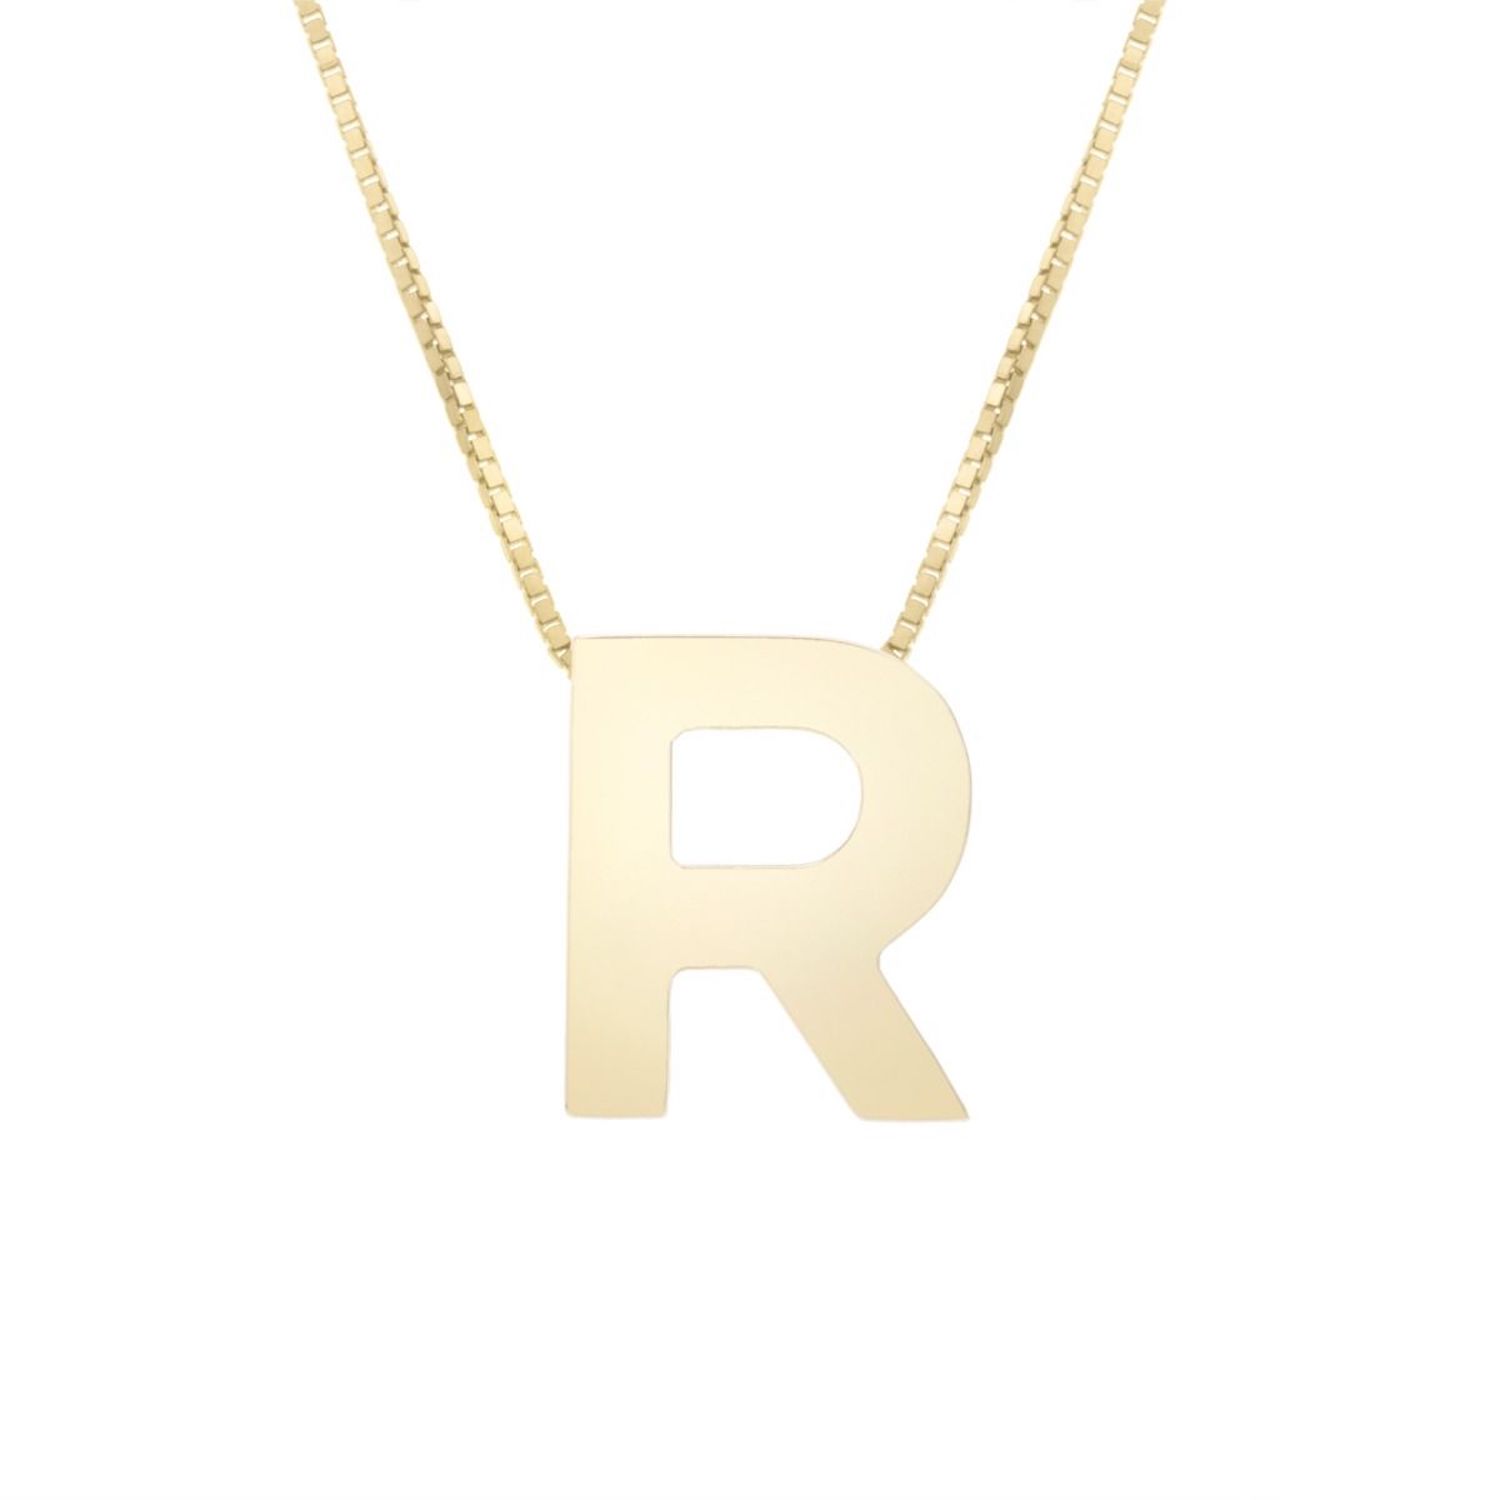 14K Yellow Gold Block Letter Initial Pendant Box Chain Necklace 16"-18" - R